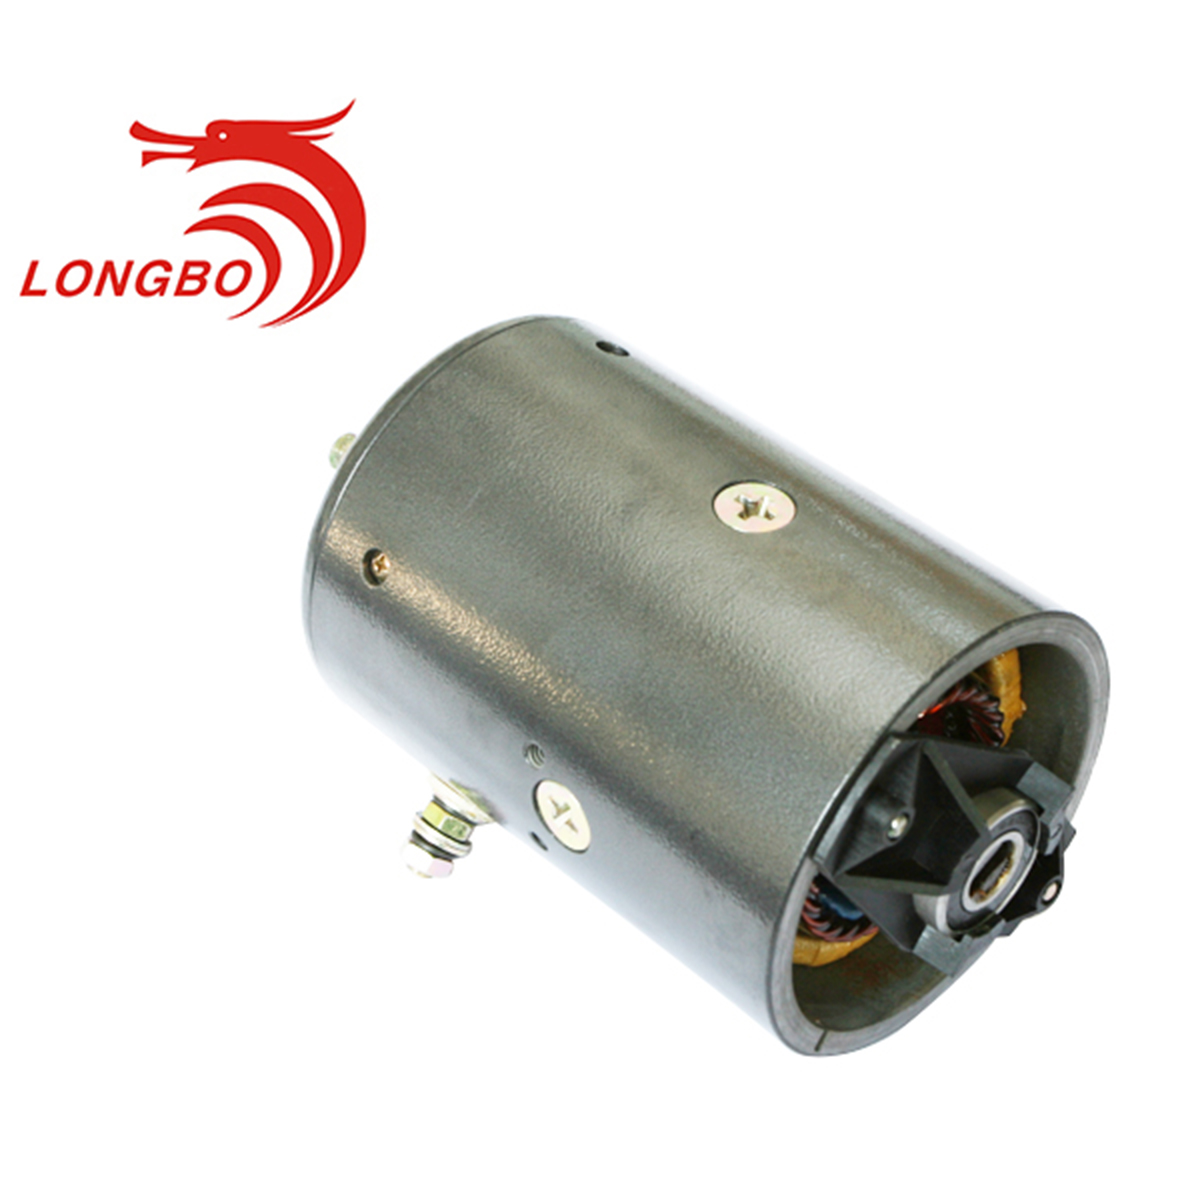 12V 1.6KW Series Wound double ball bearing DC Motor W-9993D